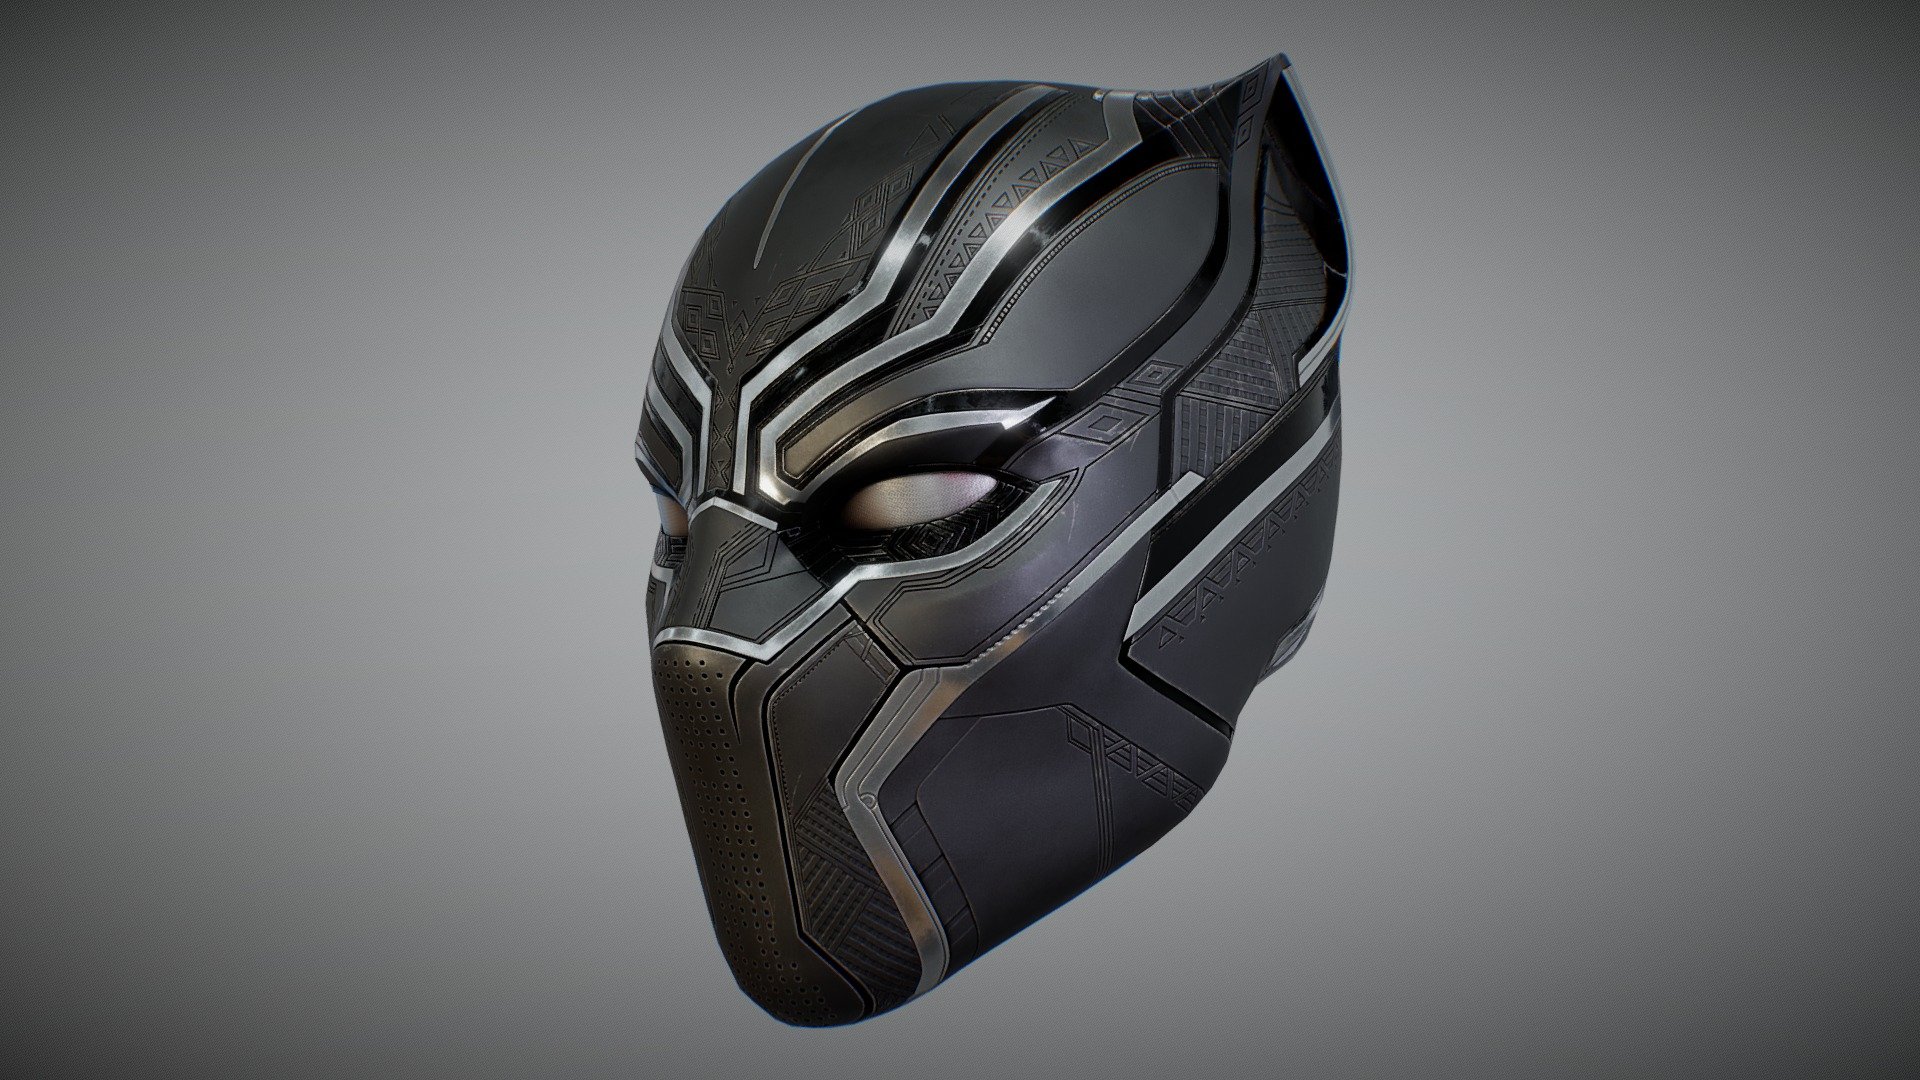 Black Panther Mask - Sculpted in ZBrush, Textured in Substance Painter

Based on the mask design from Captain America: Civil War and the beginning of Black Panther - Black Panther Mask - 3D model by Brandon Shirk (@ShirkBrandon) 3d model